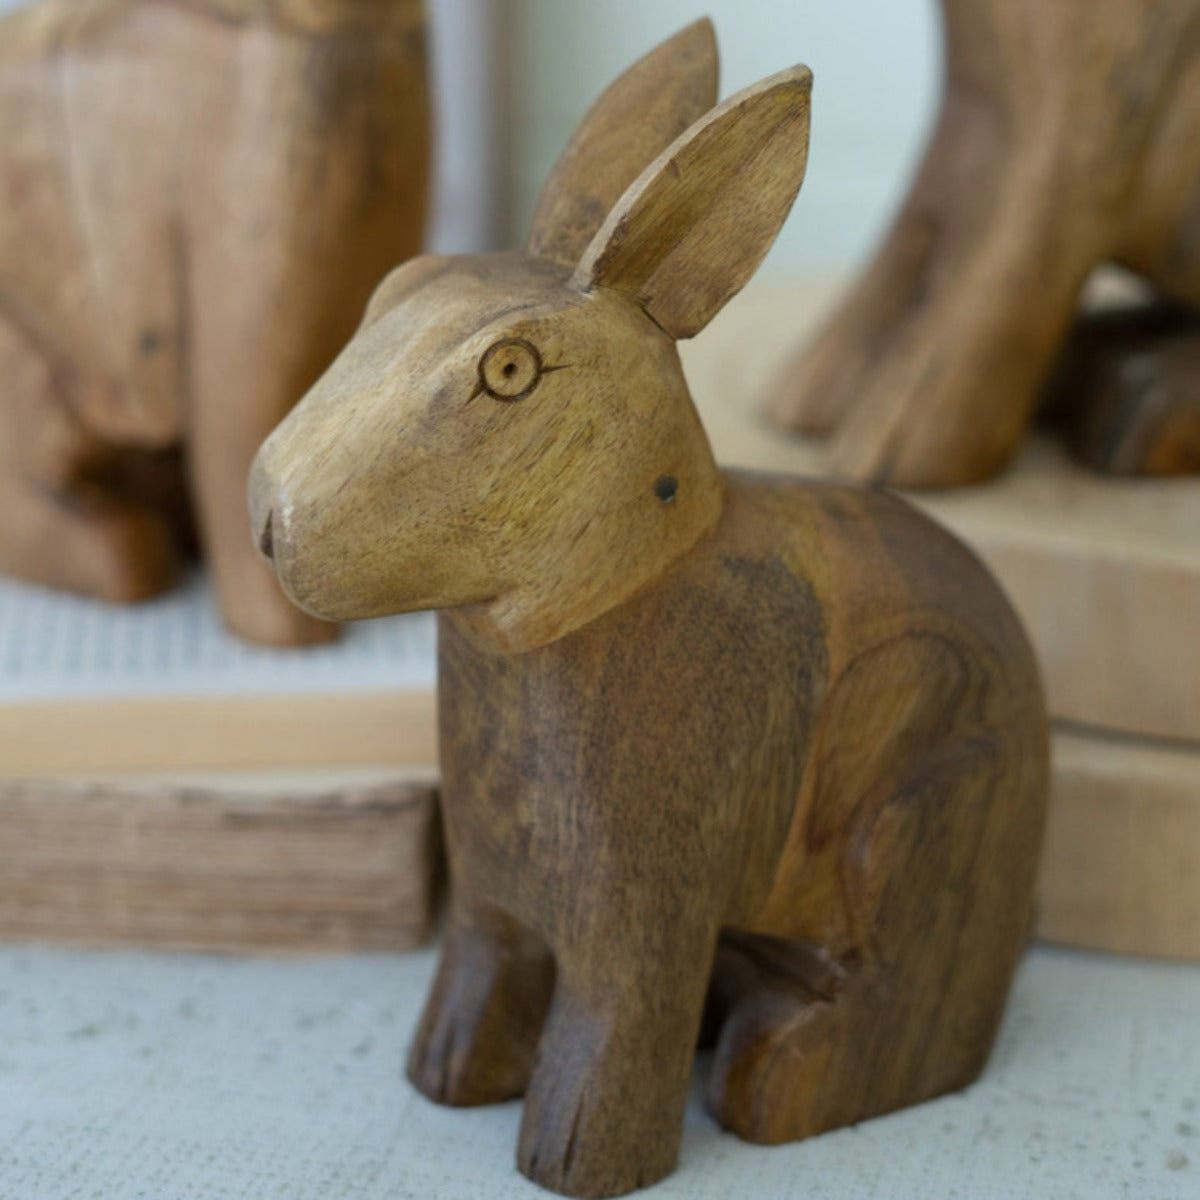 Rustic Wooden Rabbits - Iron Accents